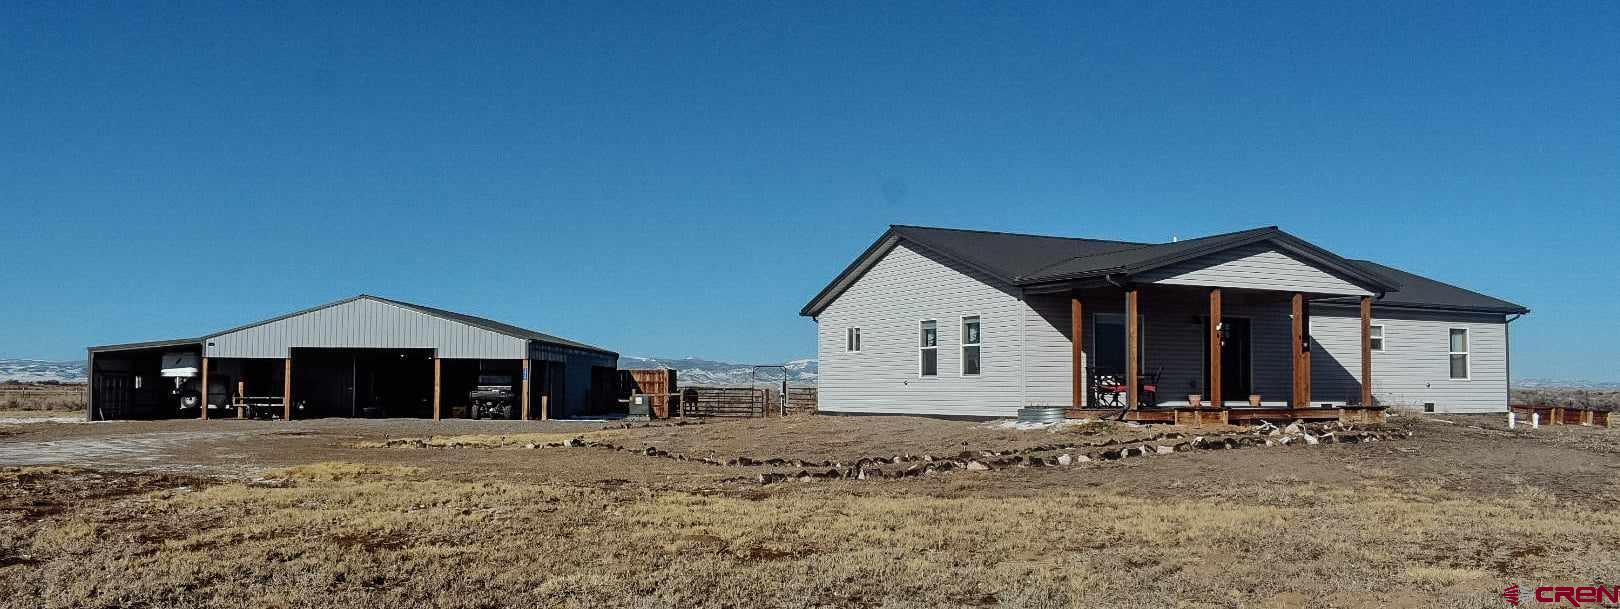 Photo of 13725 Rd 104 South in Alamosa, CO